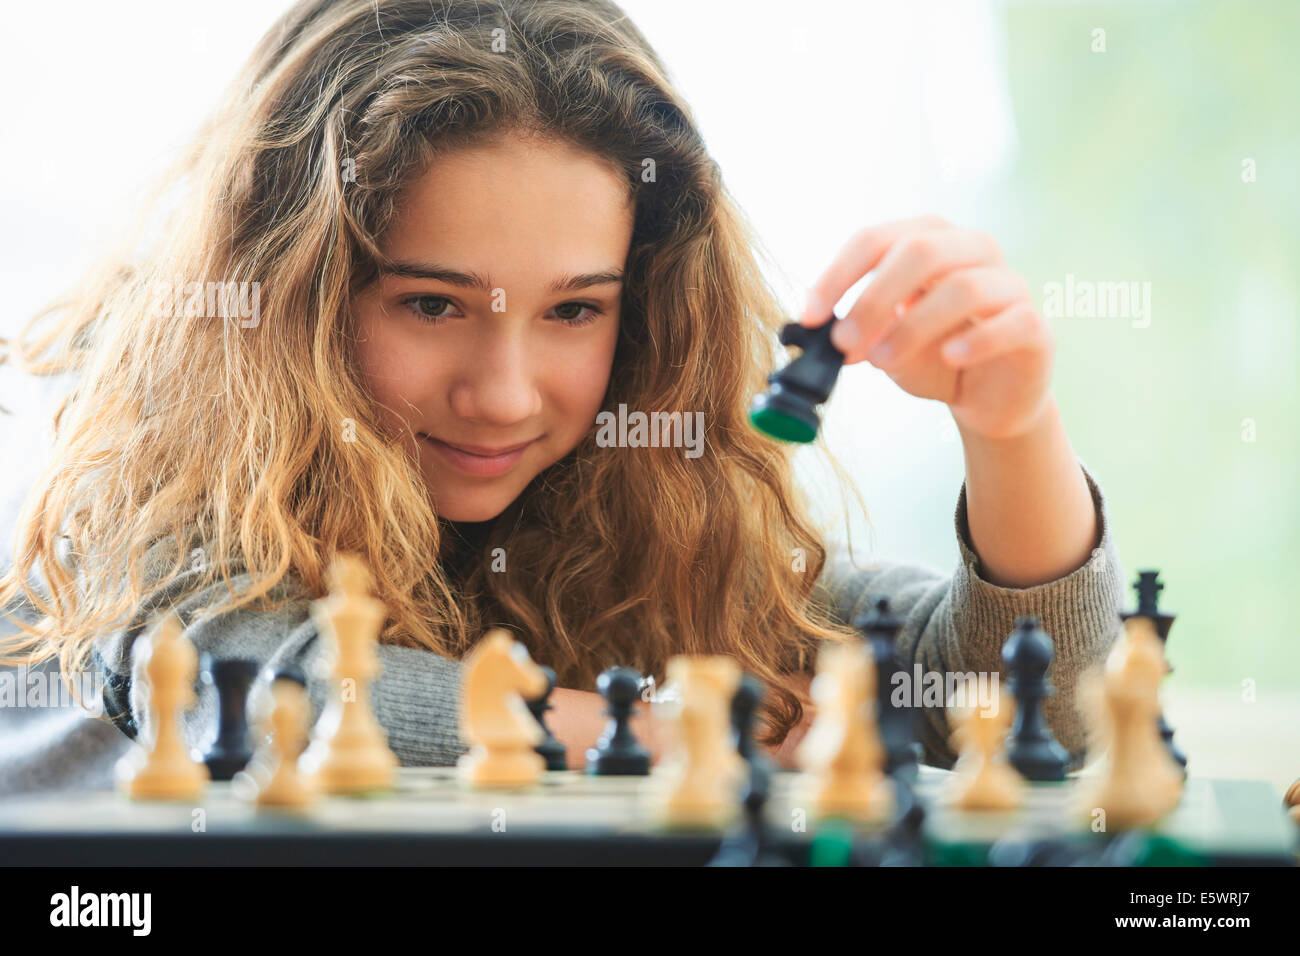 Portrait of young girl playing chess Banque D'Images